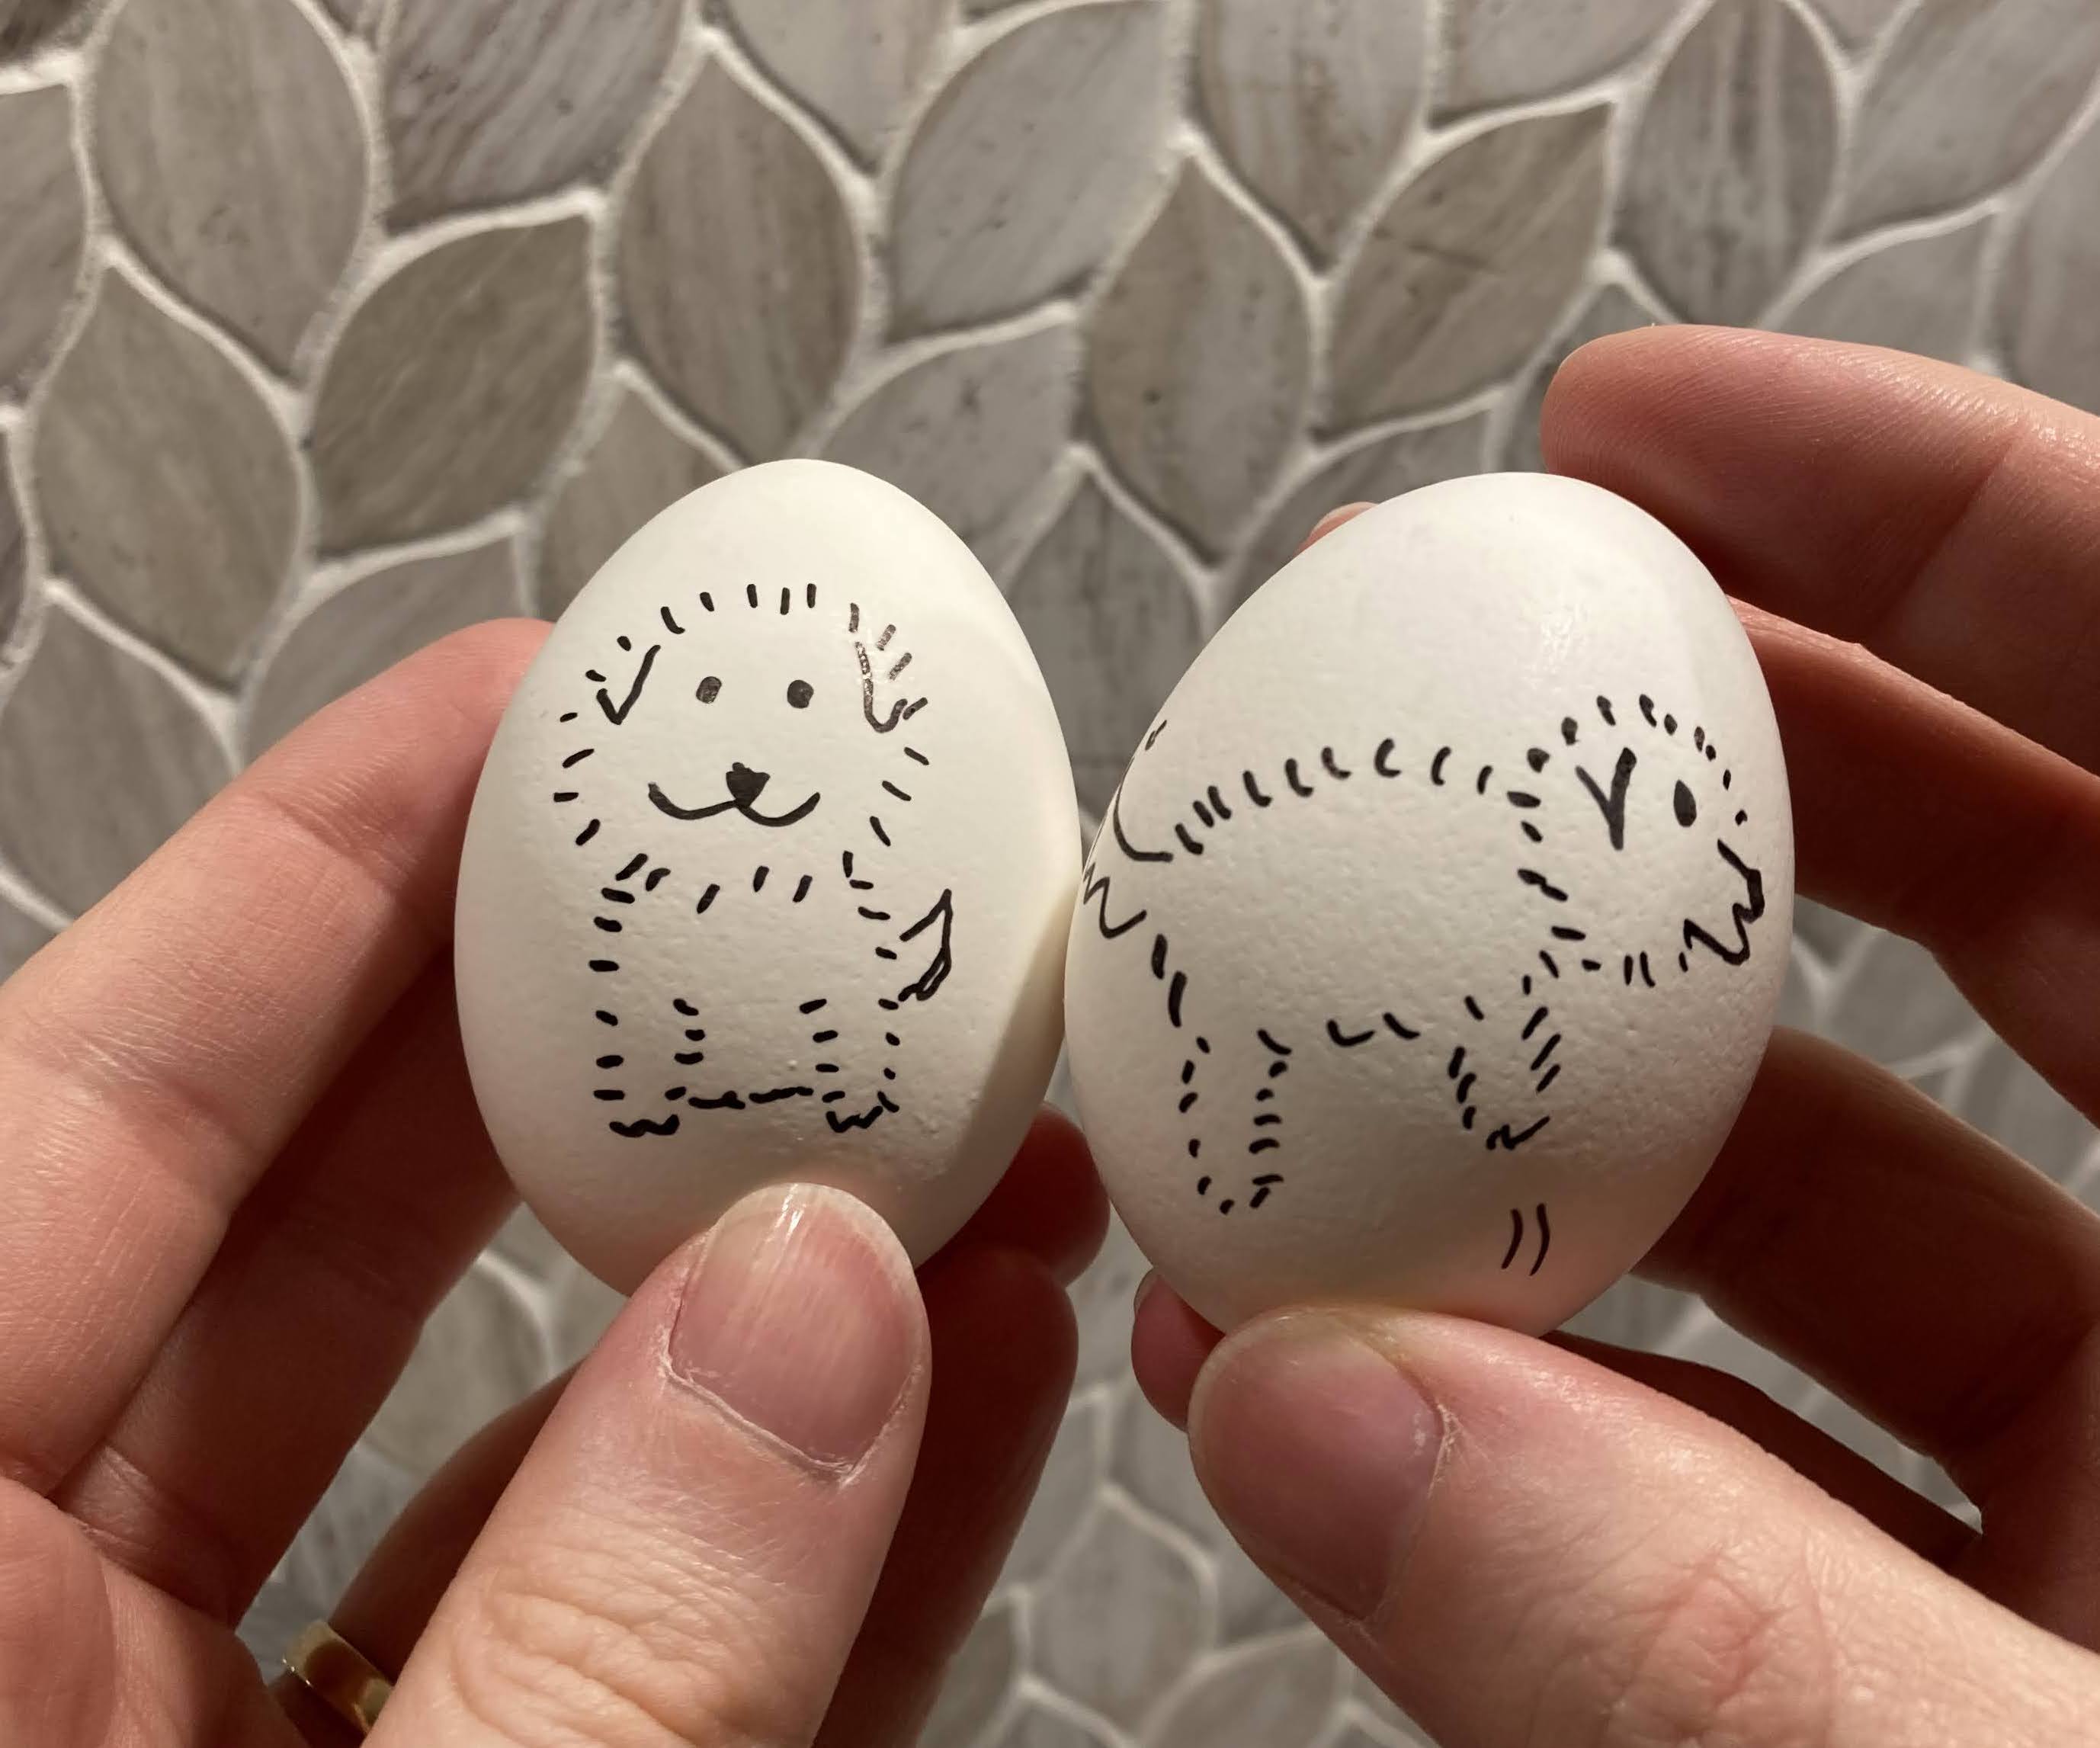 Two boiled eggs with pictures of a puppy drawn on them